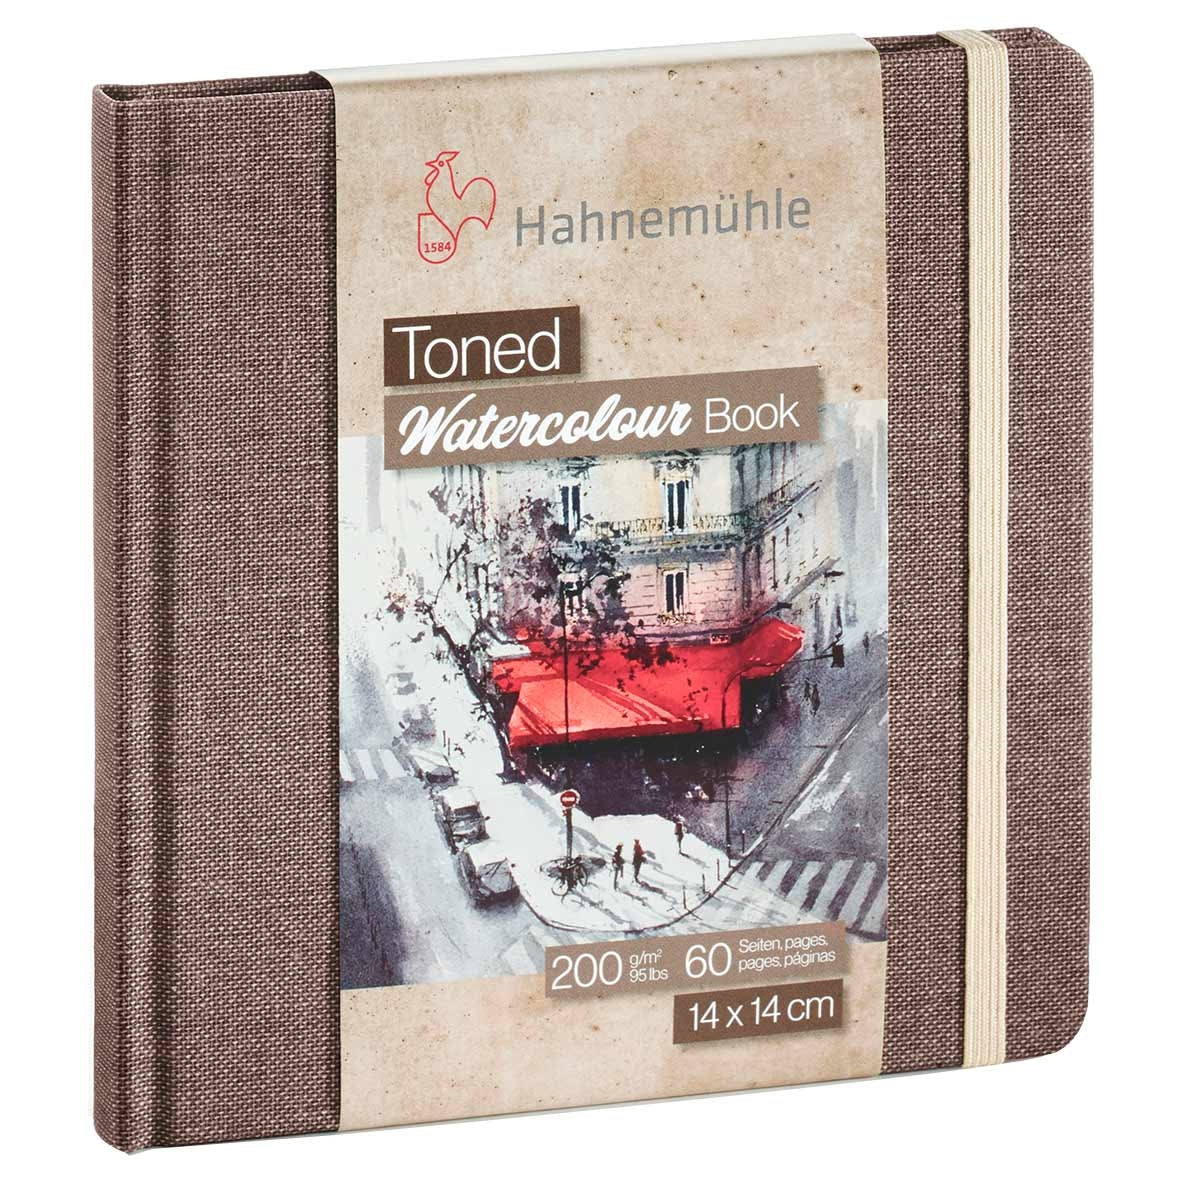 Hahnemuhle - Toned Watercolour Books - Beige 14 x 14cm Square